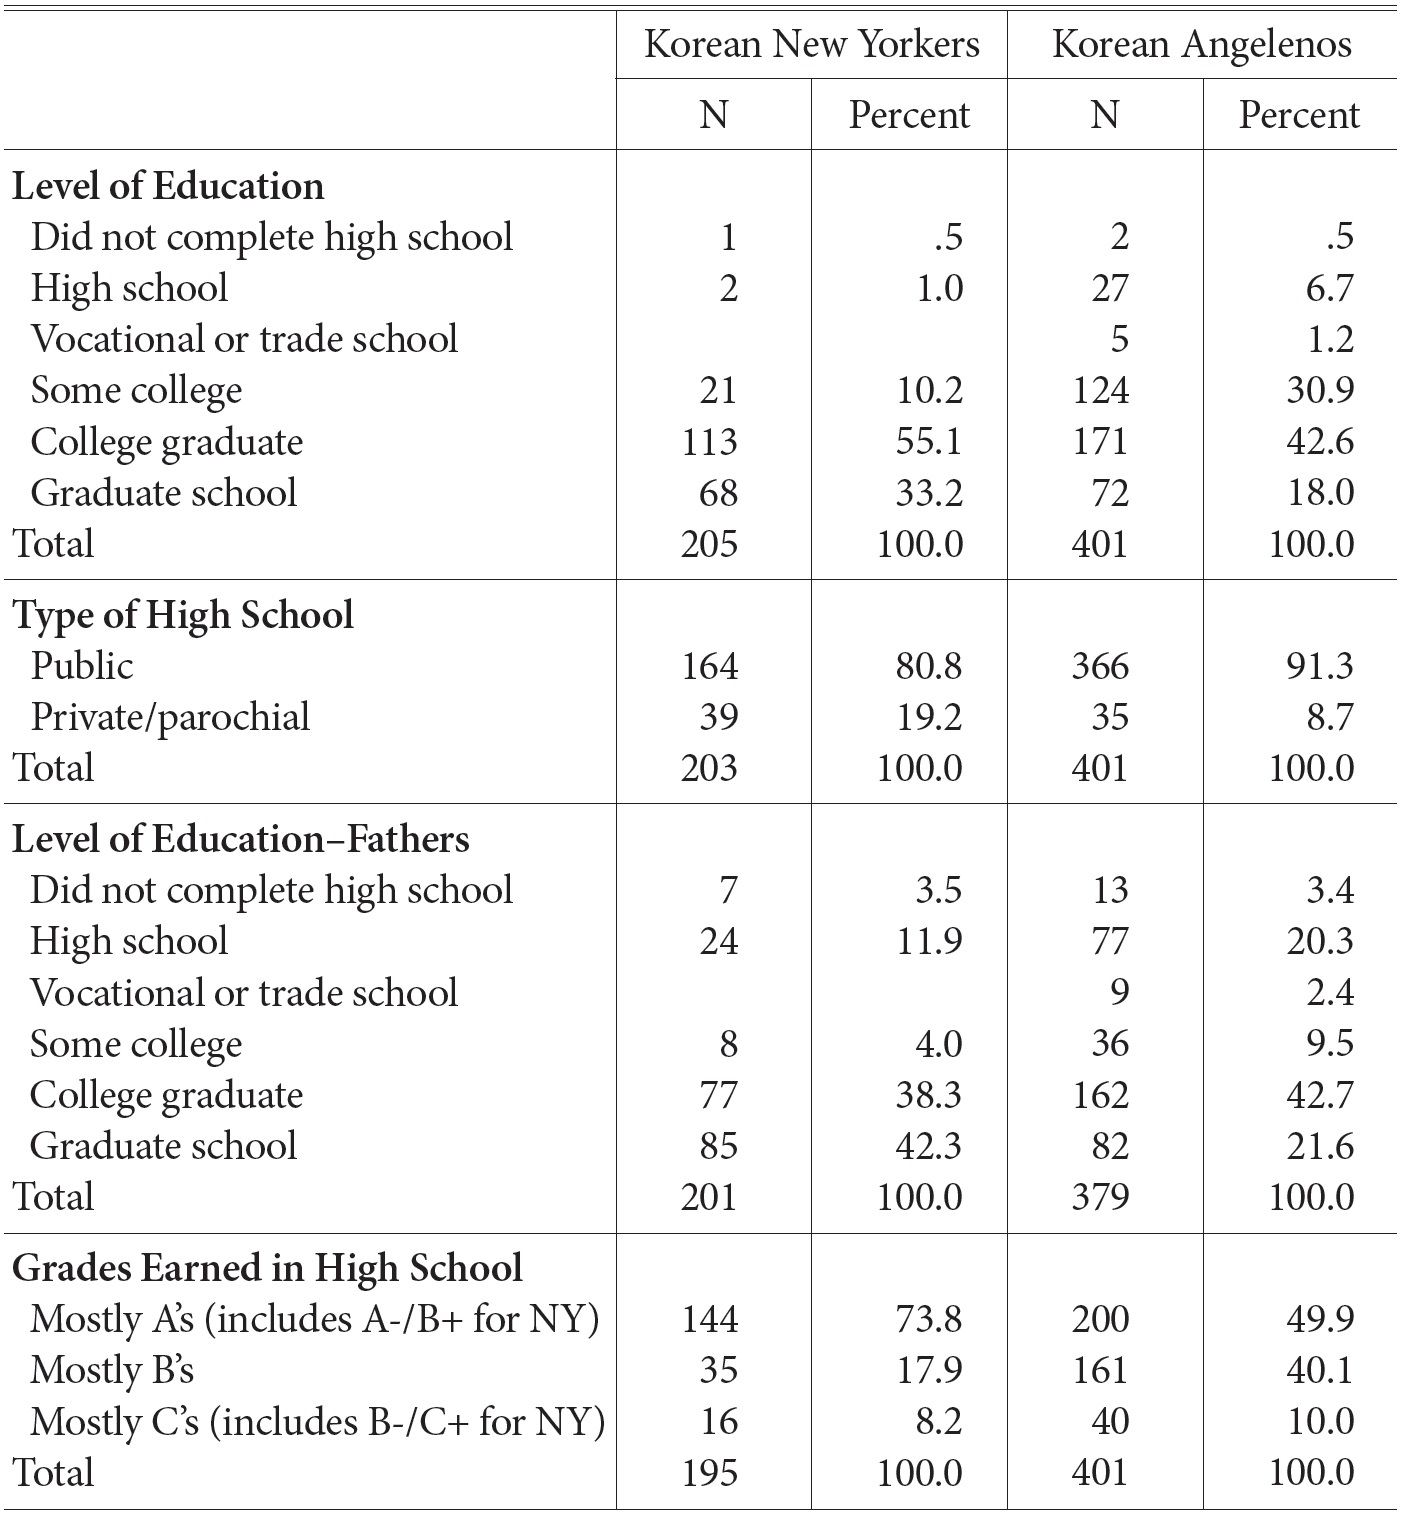 Unweighed Percentage Distribution of Level of Education, Type of High School, and Grades Earned in High School: Second-Generation Korean-Americans in New York and Los Angeles